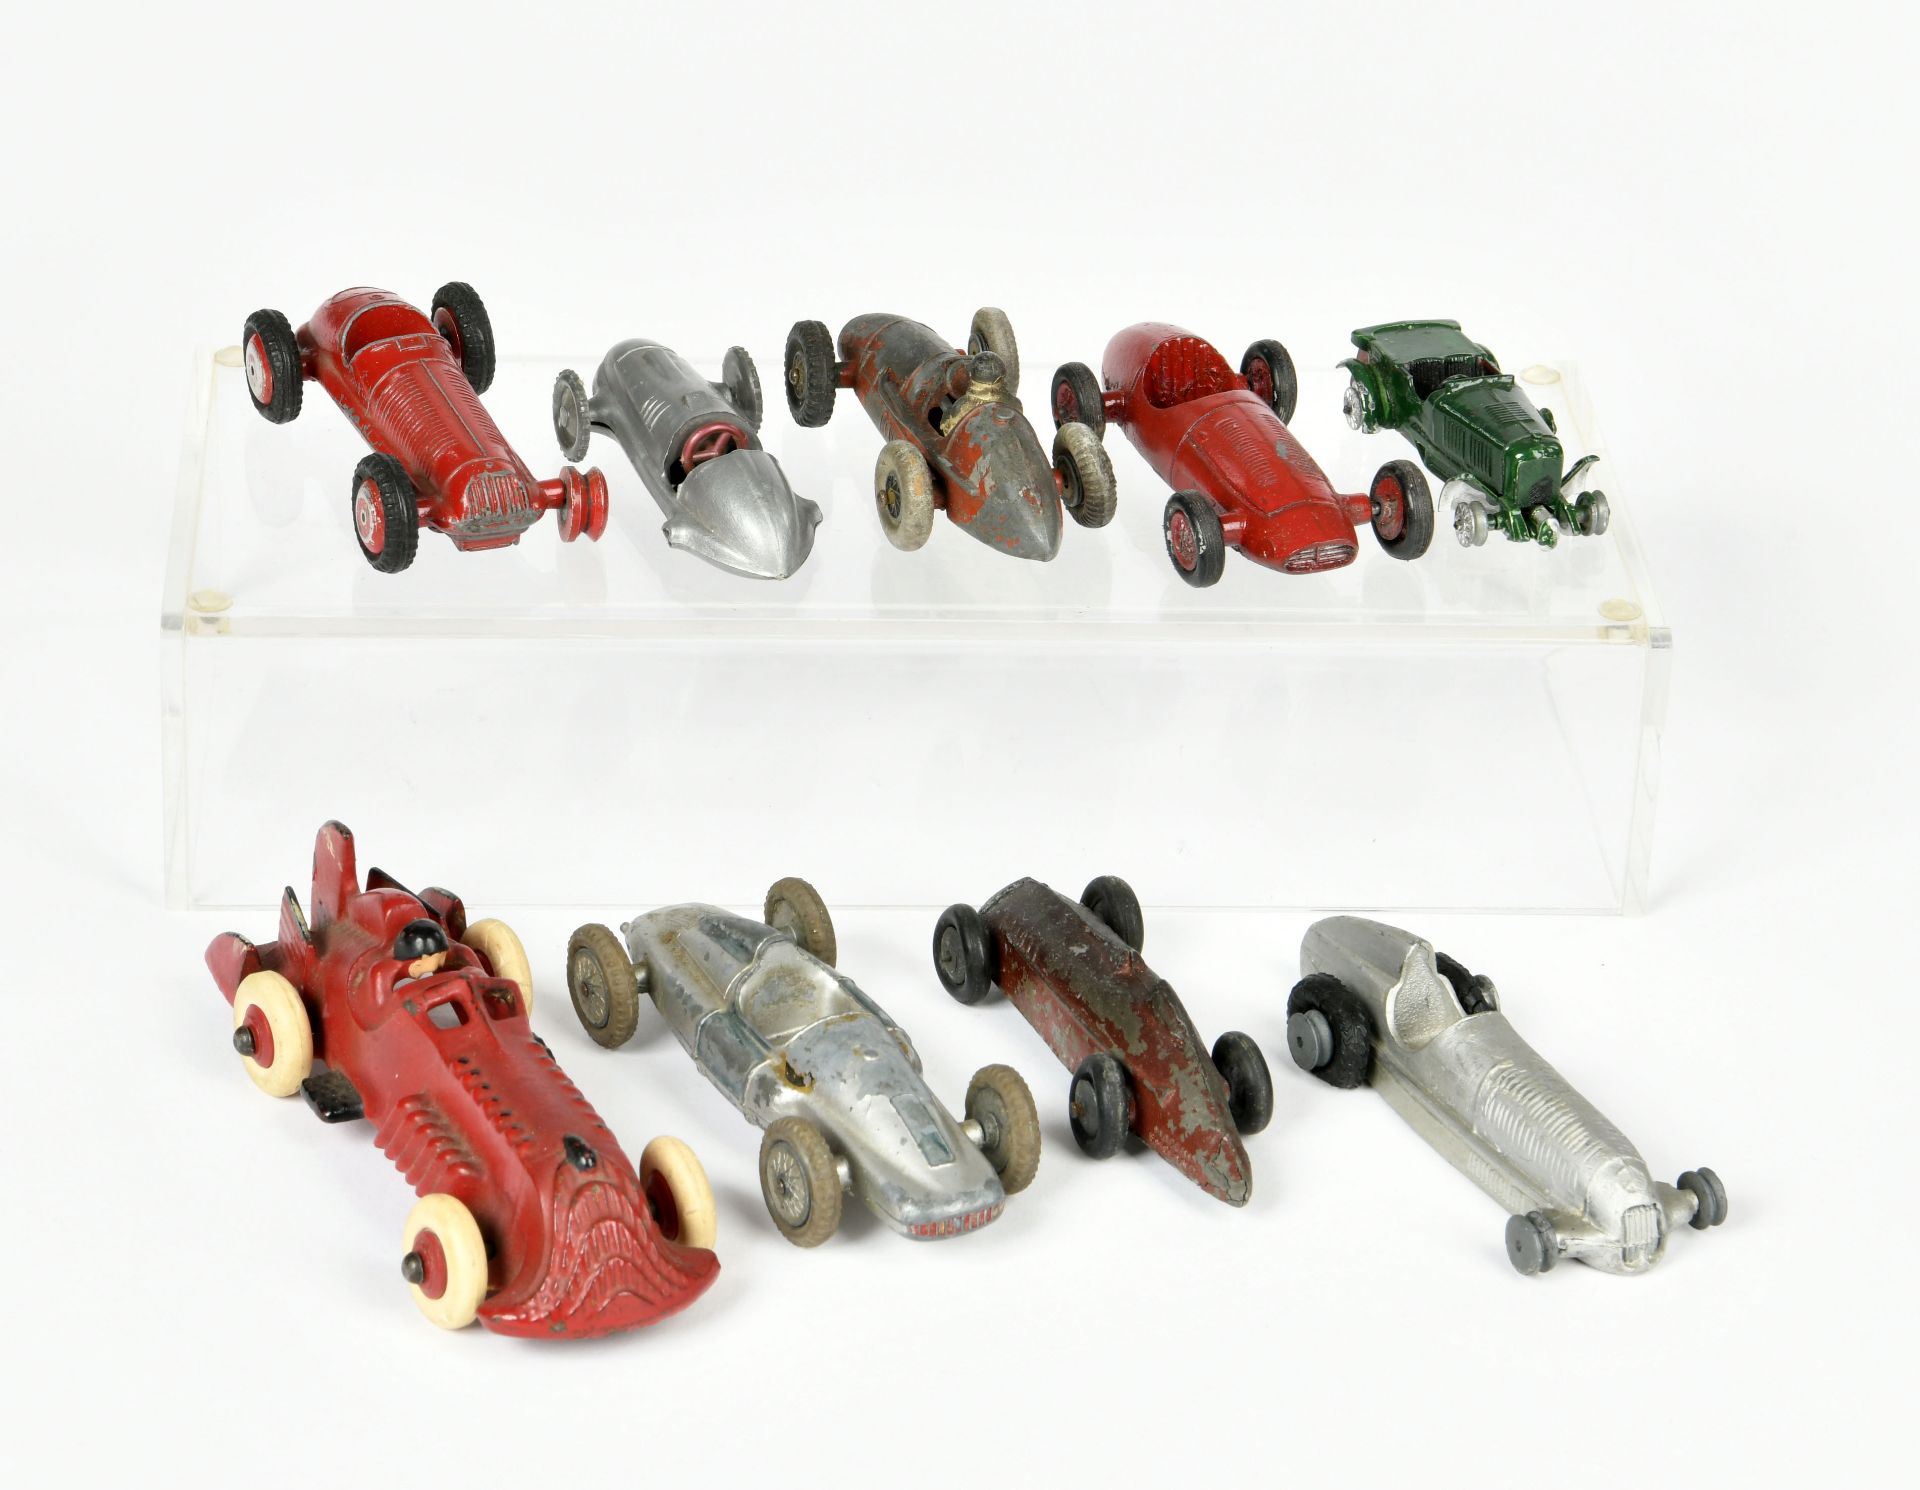 Mercury a.o., buncdle of racing cars, mostly 1:43, diecast, most of them with defects, please